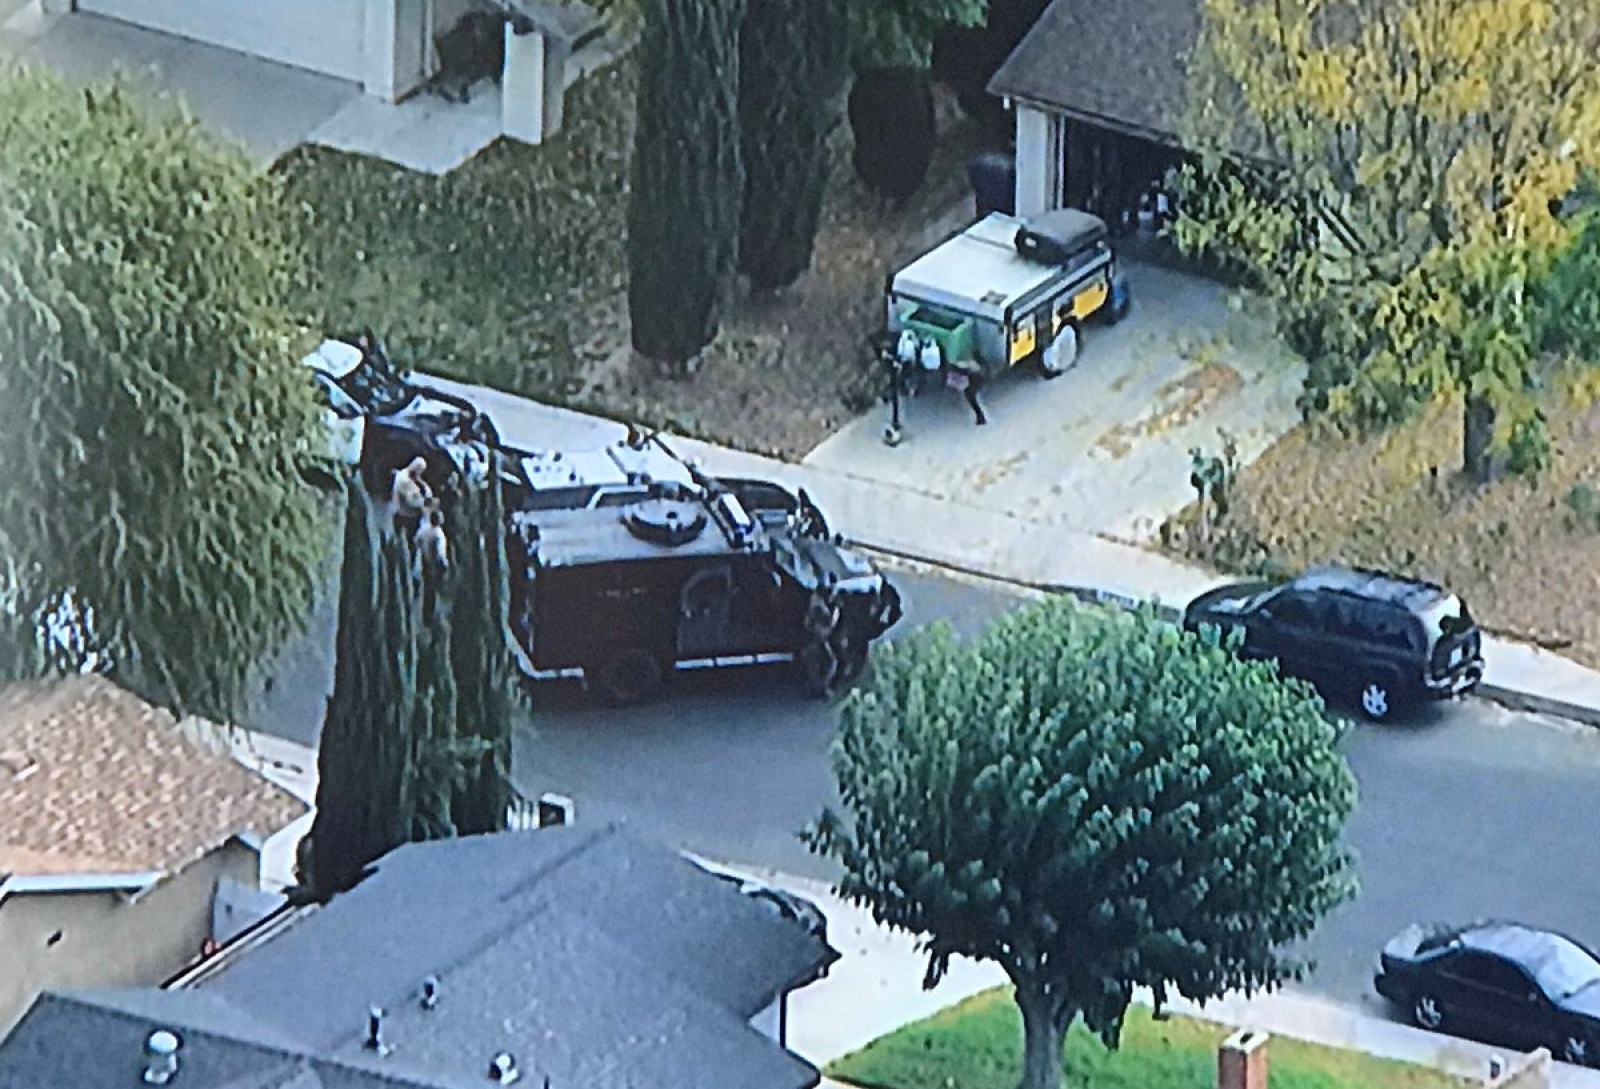 LASD SEB members arrive at nearby residence following up on leads after school shooting in Santa Clarita, California Los Angeles County Sheriff's Department (LASD) Special Enforcement Bureau (SEB) members arrive at a nearby residence, following up on leads regarding the possible suspect involved in the Saugus High School shooting in Santa Clarita, California, U.S., November 14, 2019 in this image obtained from social media. LASD SEB via REUTERS   ATTENTION EDITORS - THIS IMAGE HAS BEEN SUPPLIED BY A THIRD PARTY. MANDATORY CREDIT. NO RESALES. NO ARCHIVES. LASD SEB